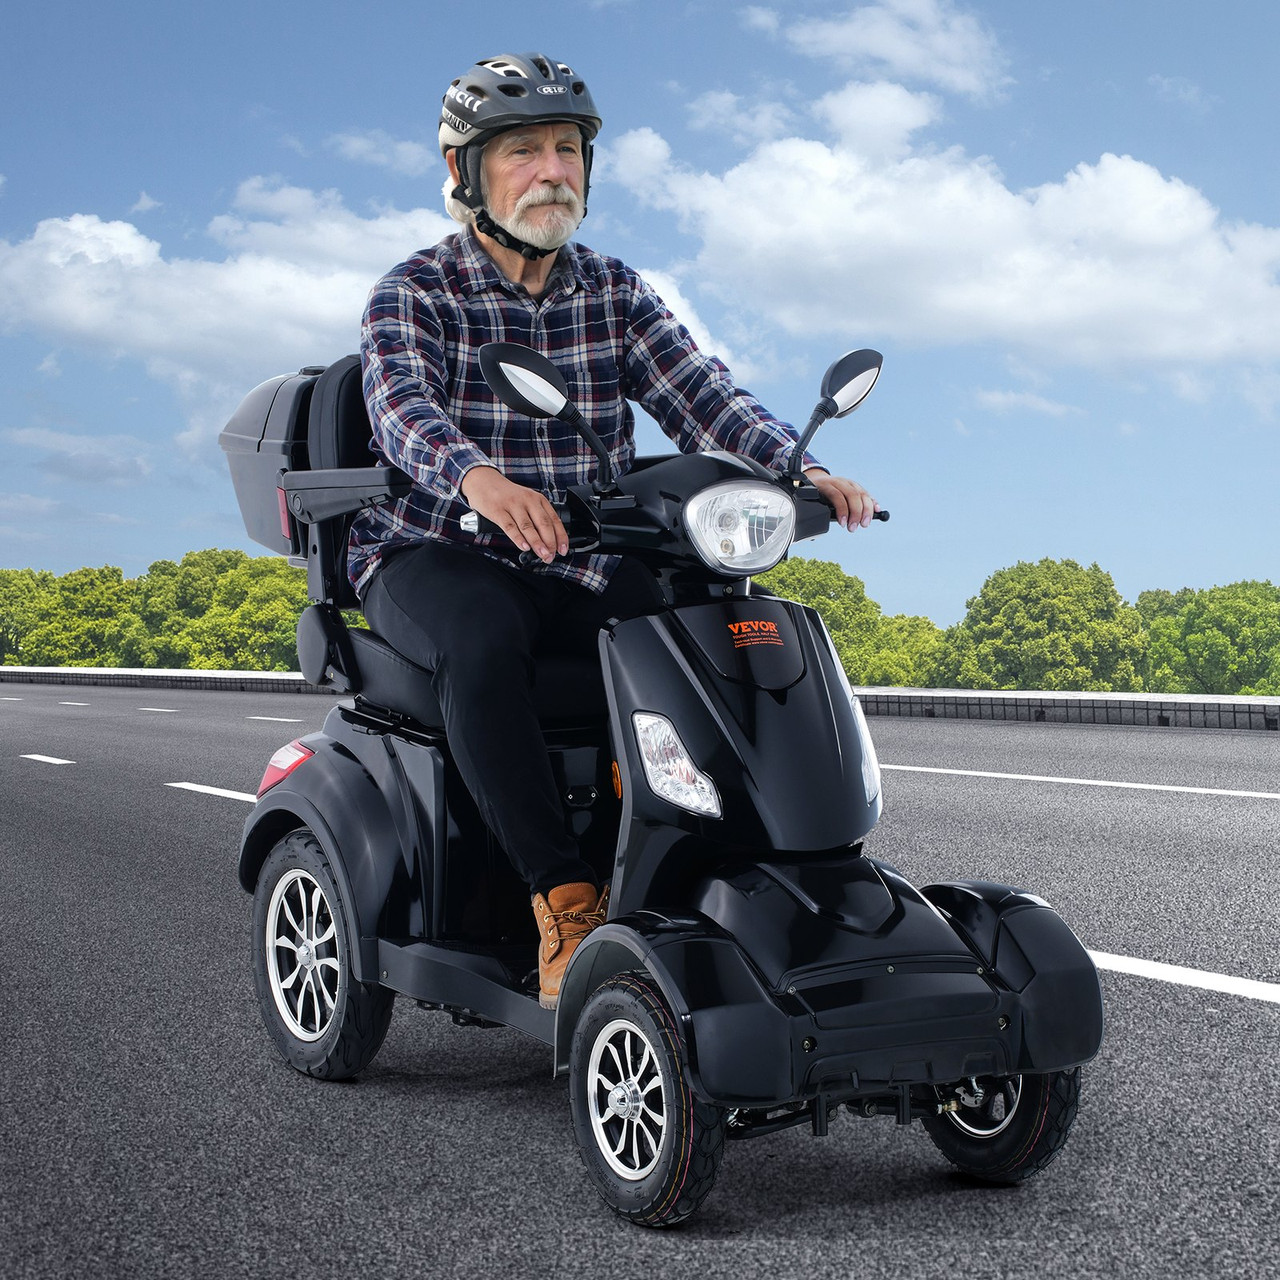 VEVOR Heavy Duty 4-Wheel Mobility Scooters for Seniors & Adults 500lbs Capacity - 31 Miles 3-Speed Long Range, 800W All Terrain Electric Recreational Scooter Wheelchair with 25° Max Climbing Capacity